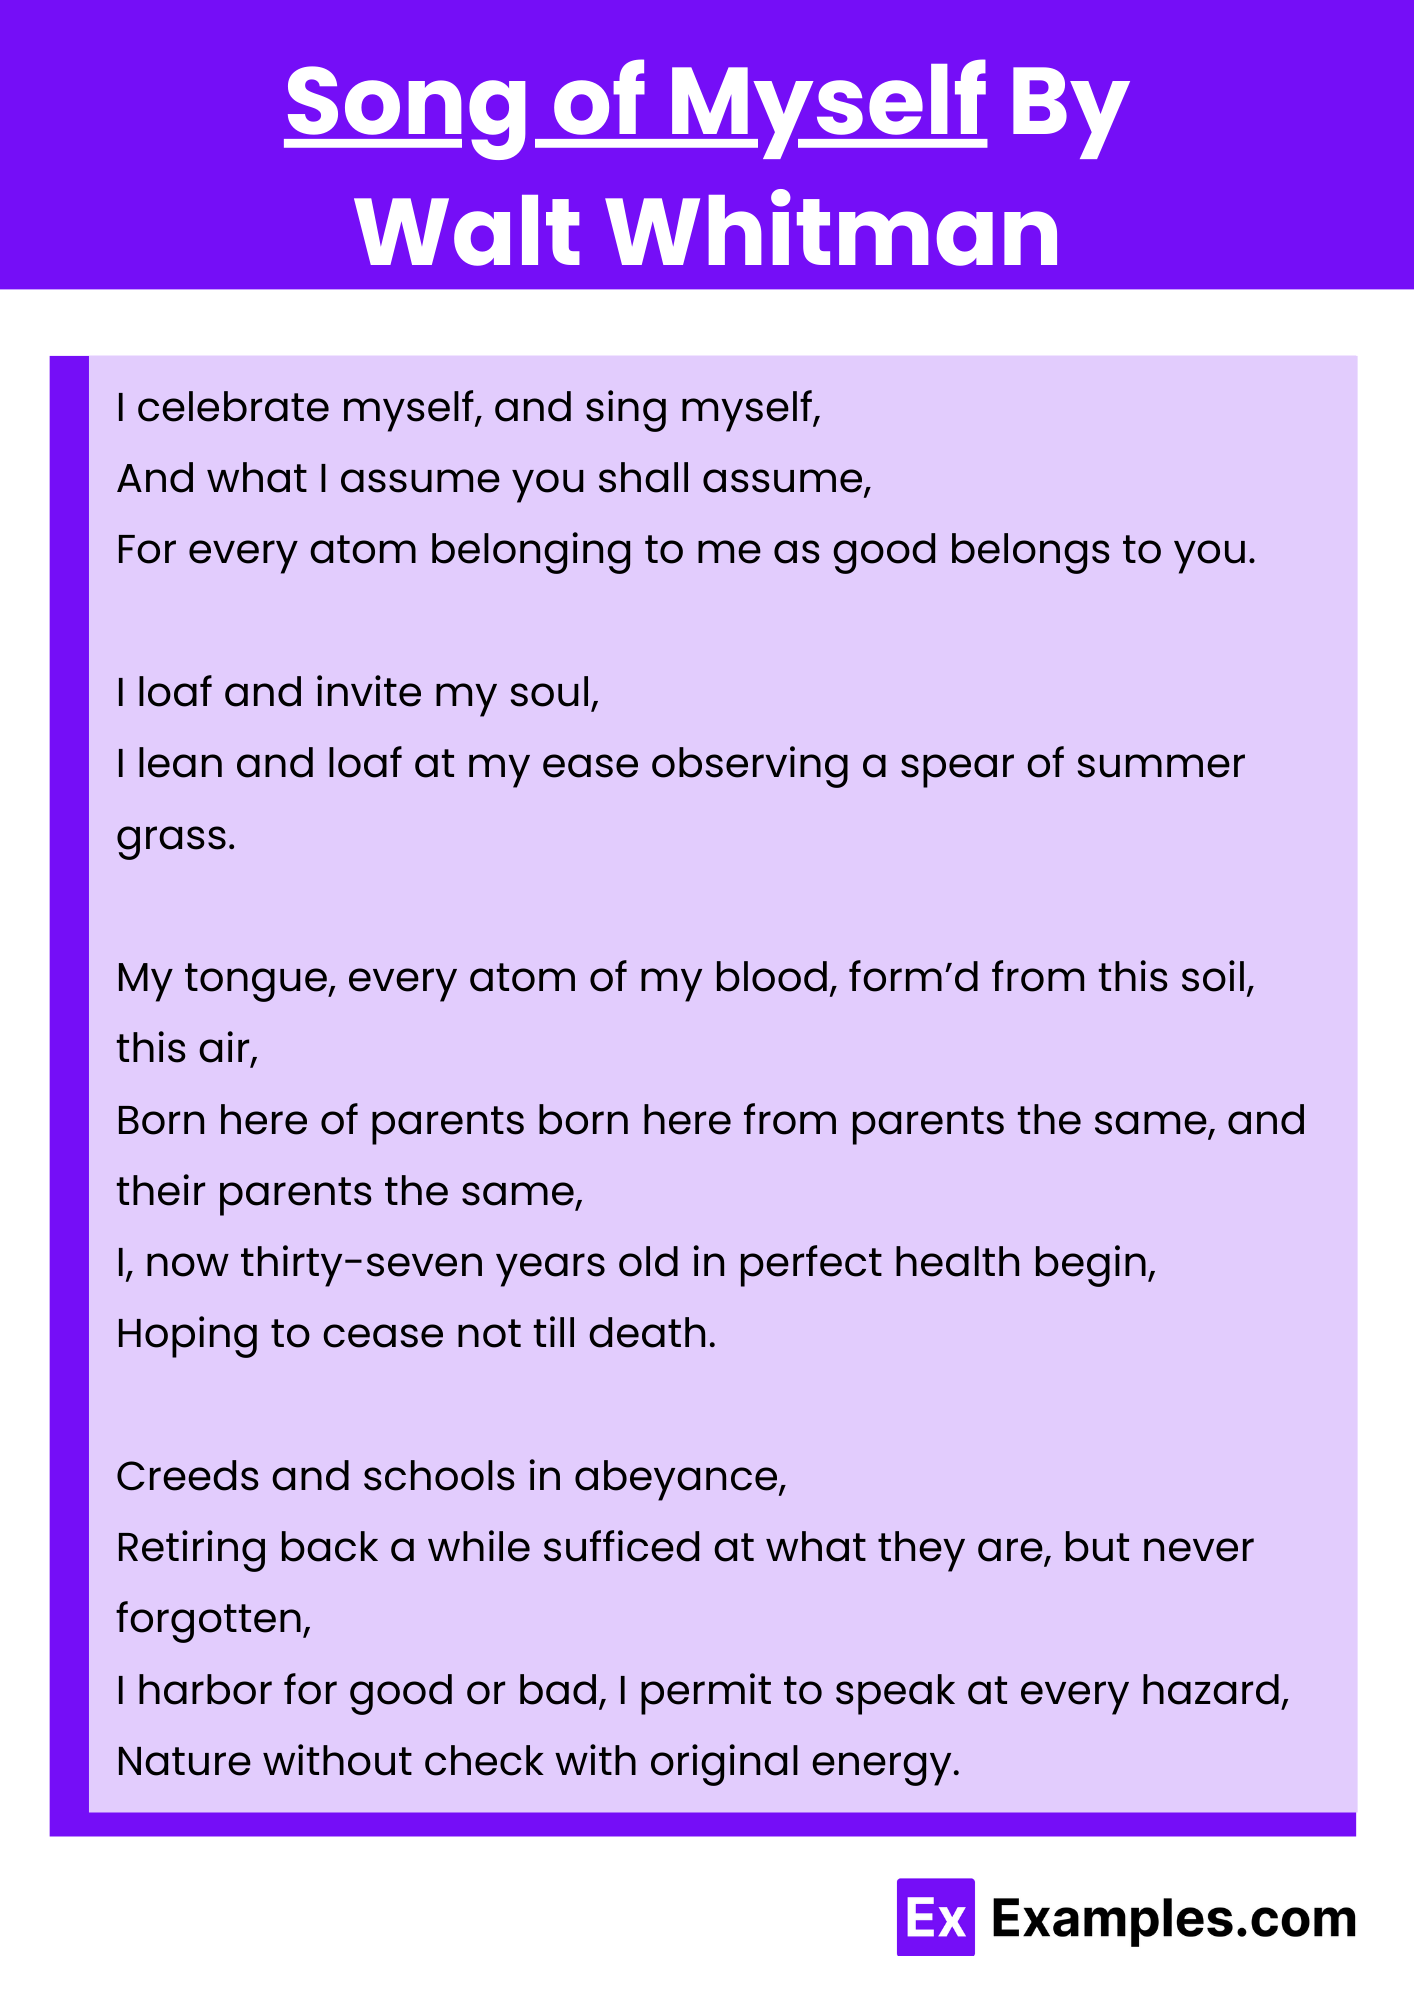 Song of Myself By Walt Whitman